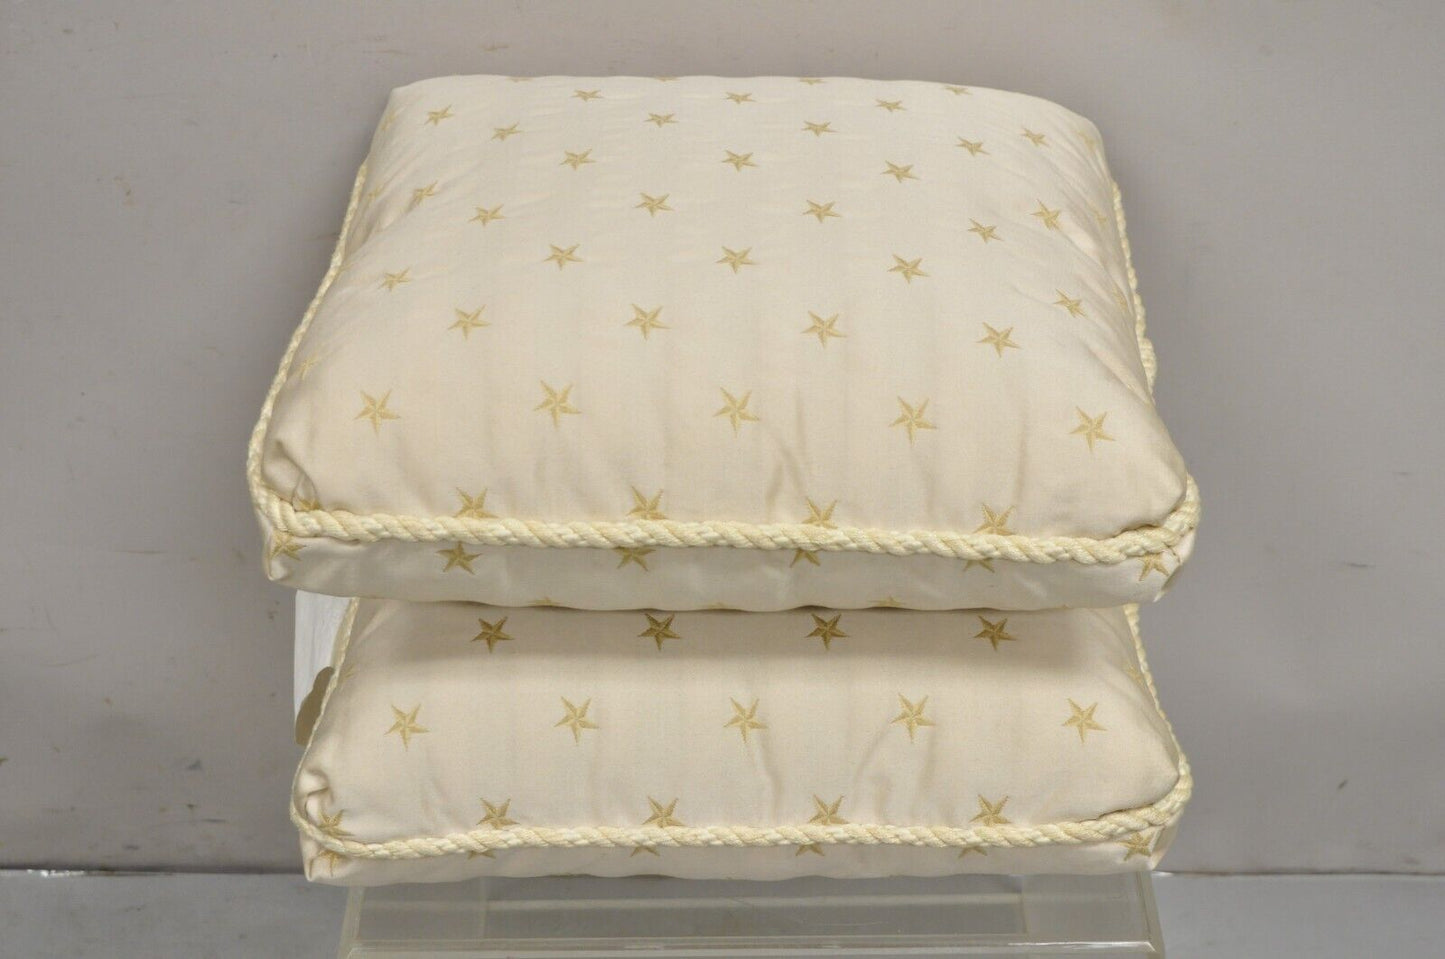 Ethan Allen Neoclassical Style Gold Star Stripe 17" Square Throw Pillows - 2 Pcs